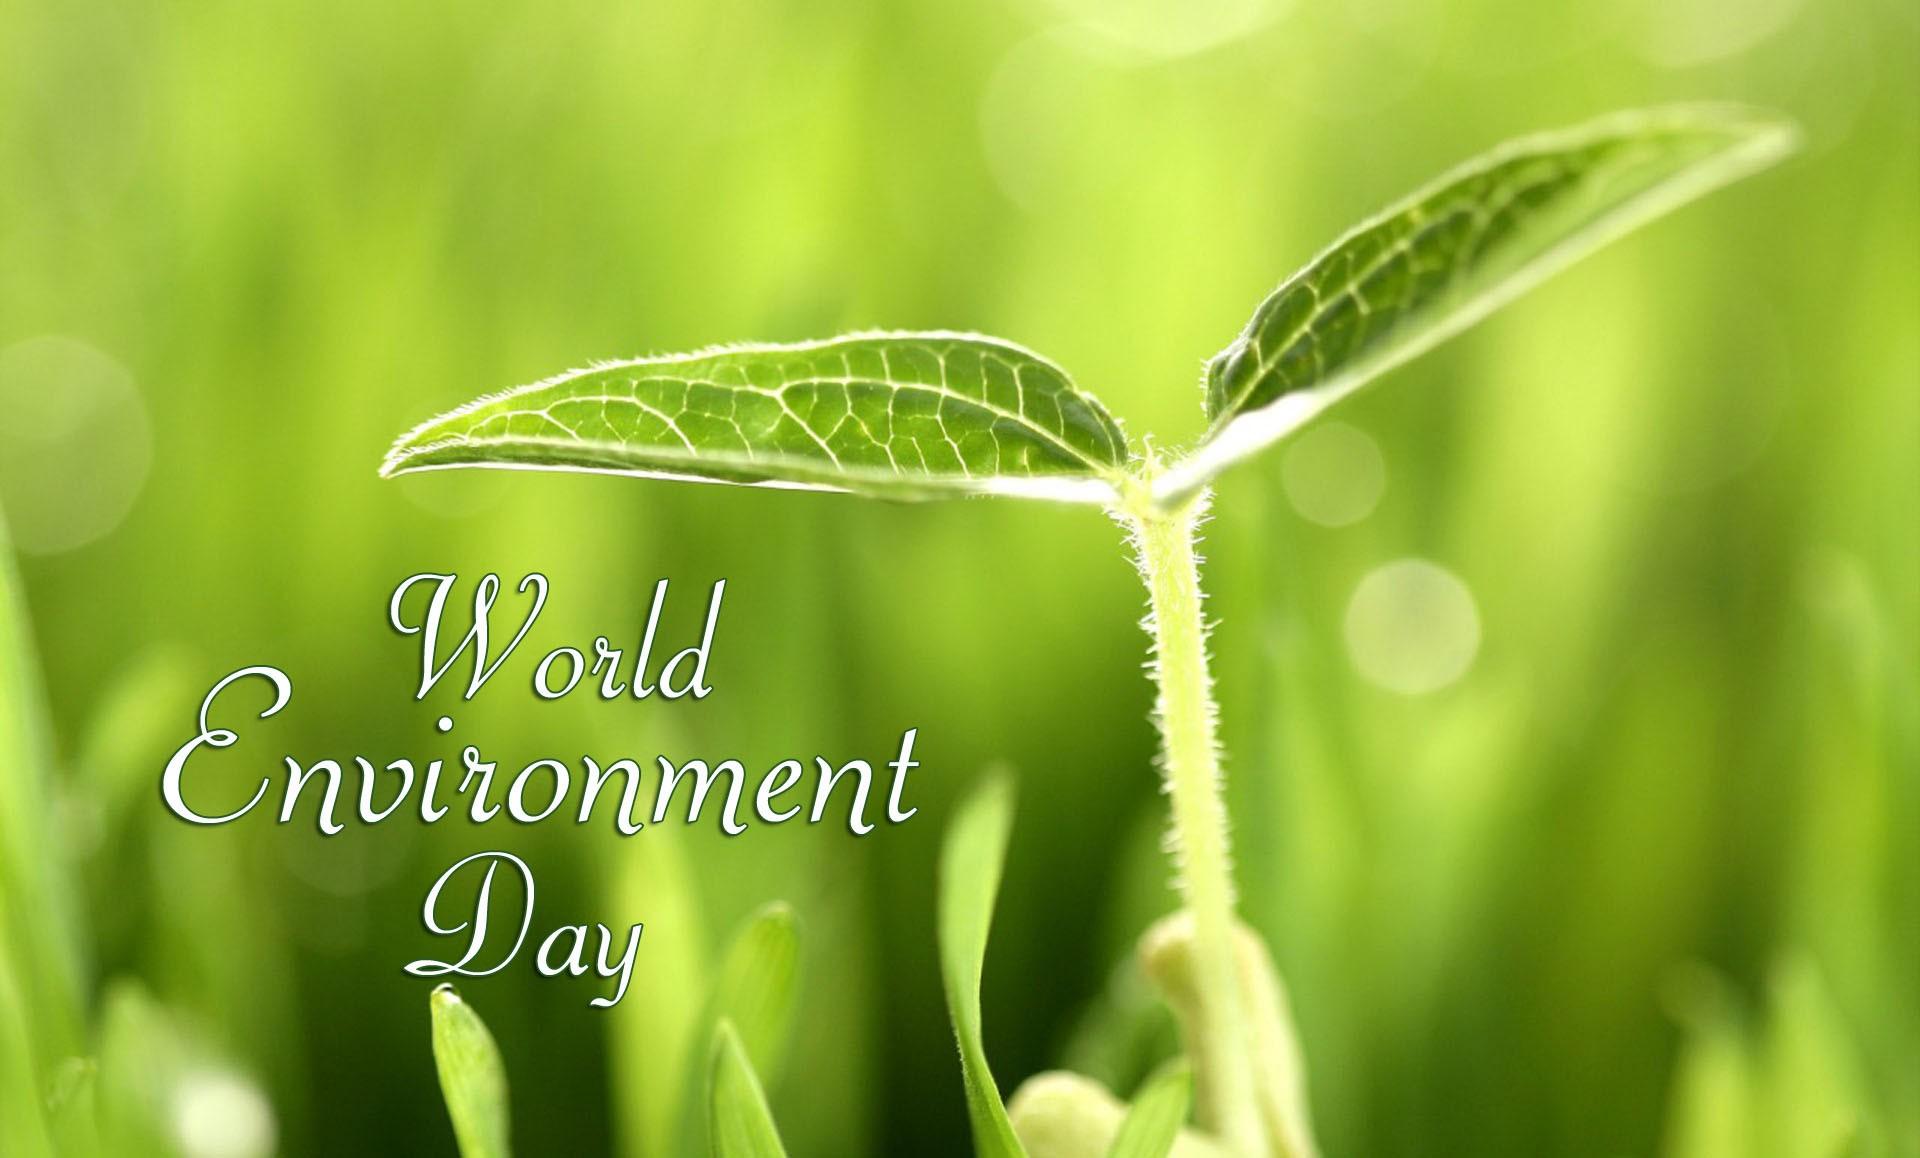 World Environment Day Image, Wallpaper, Banners & Photo